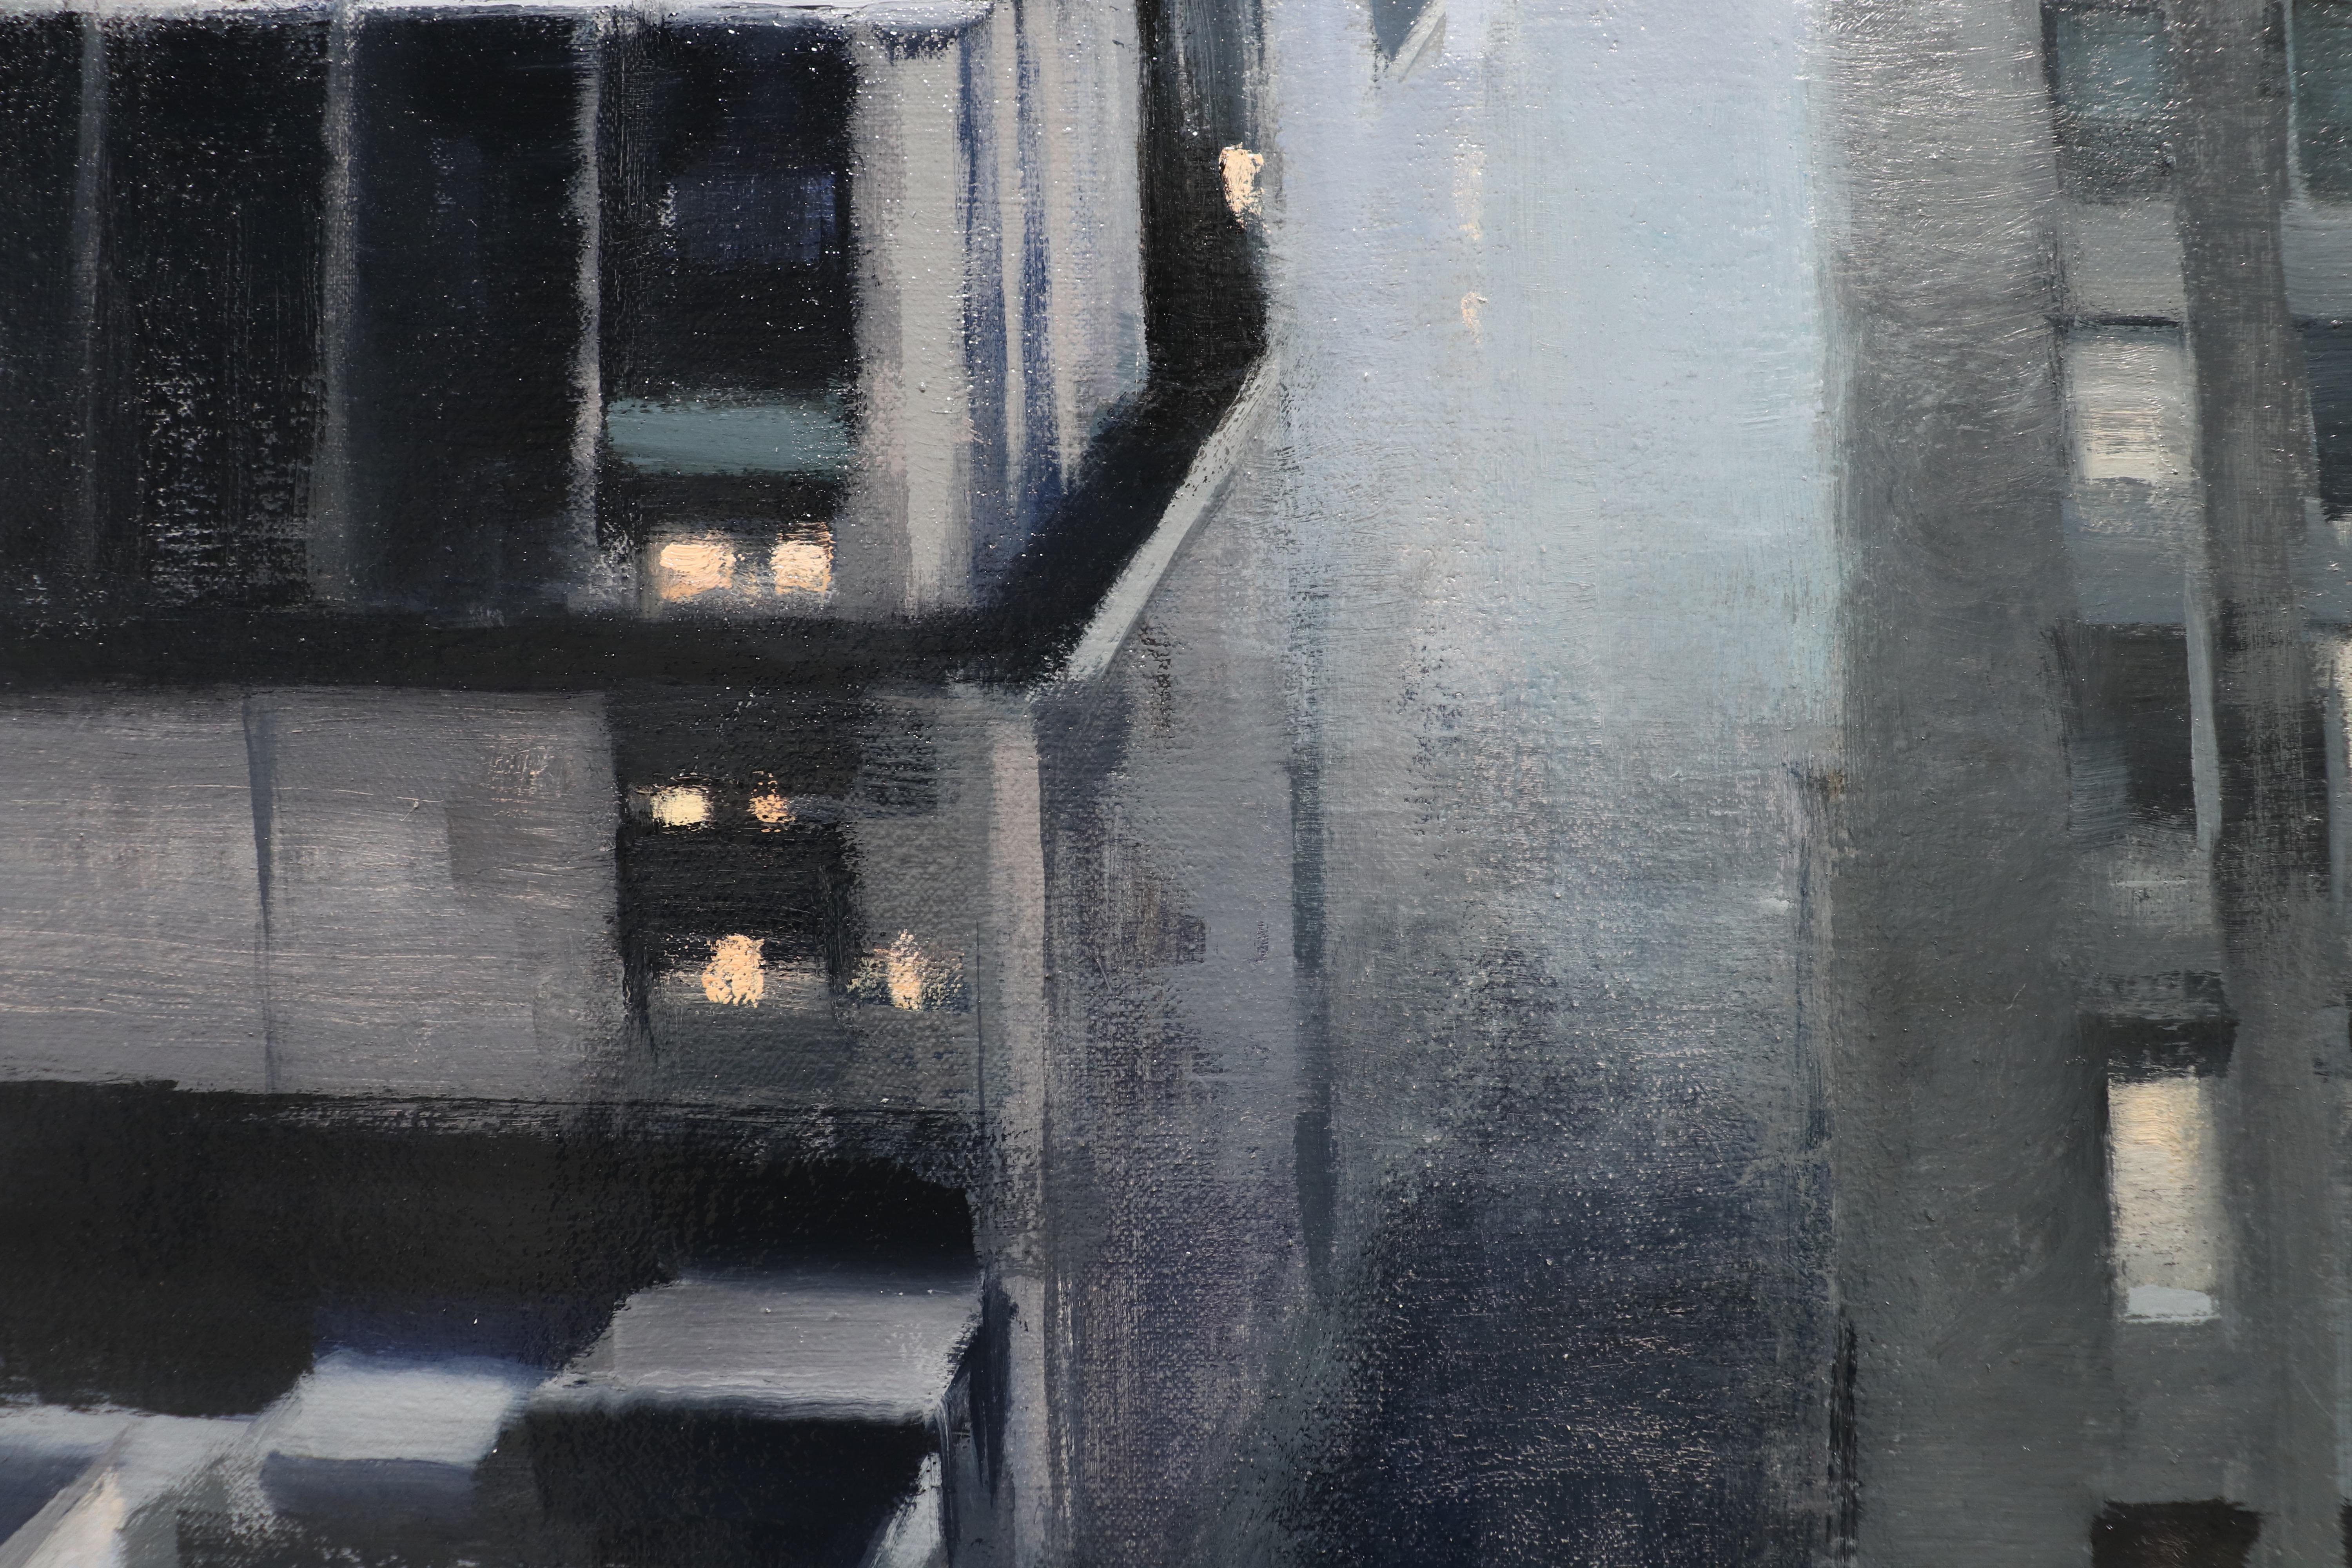 DUSK, New York City Skyline, Landscape, Hyper-Realist, Rooftop View, Grey Sky - Contemporary Painting by Kim Cogan